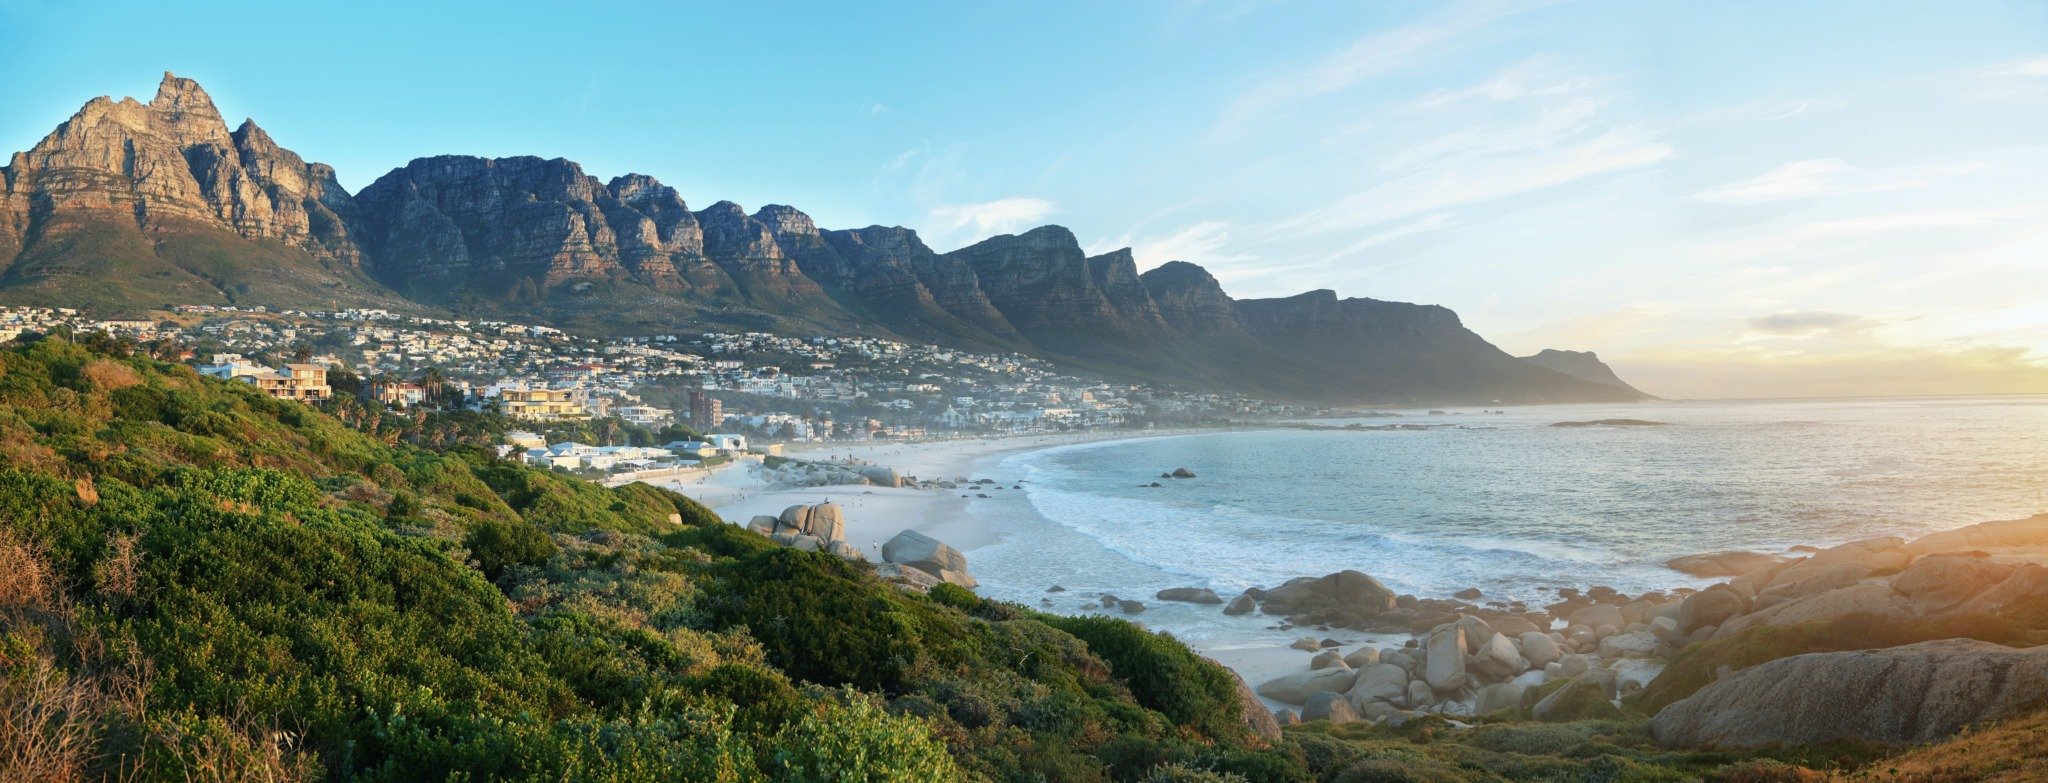 “South Africa is a leader in eco-friendly tourism”